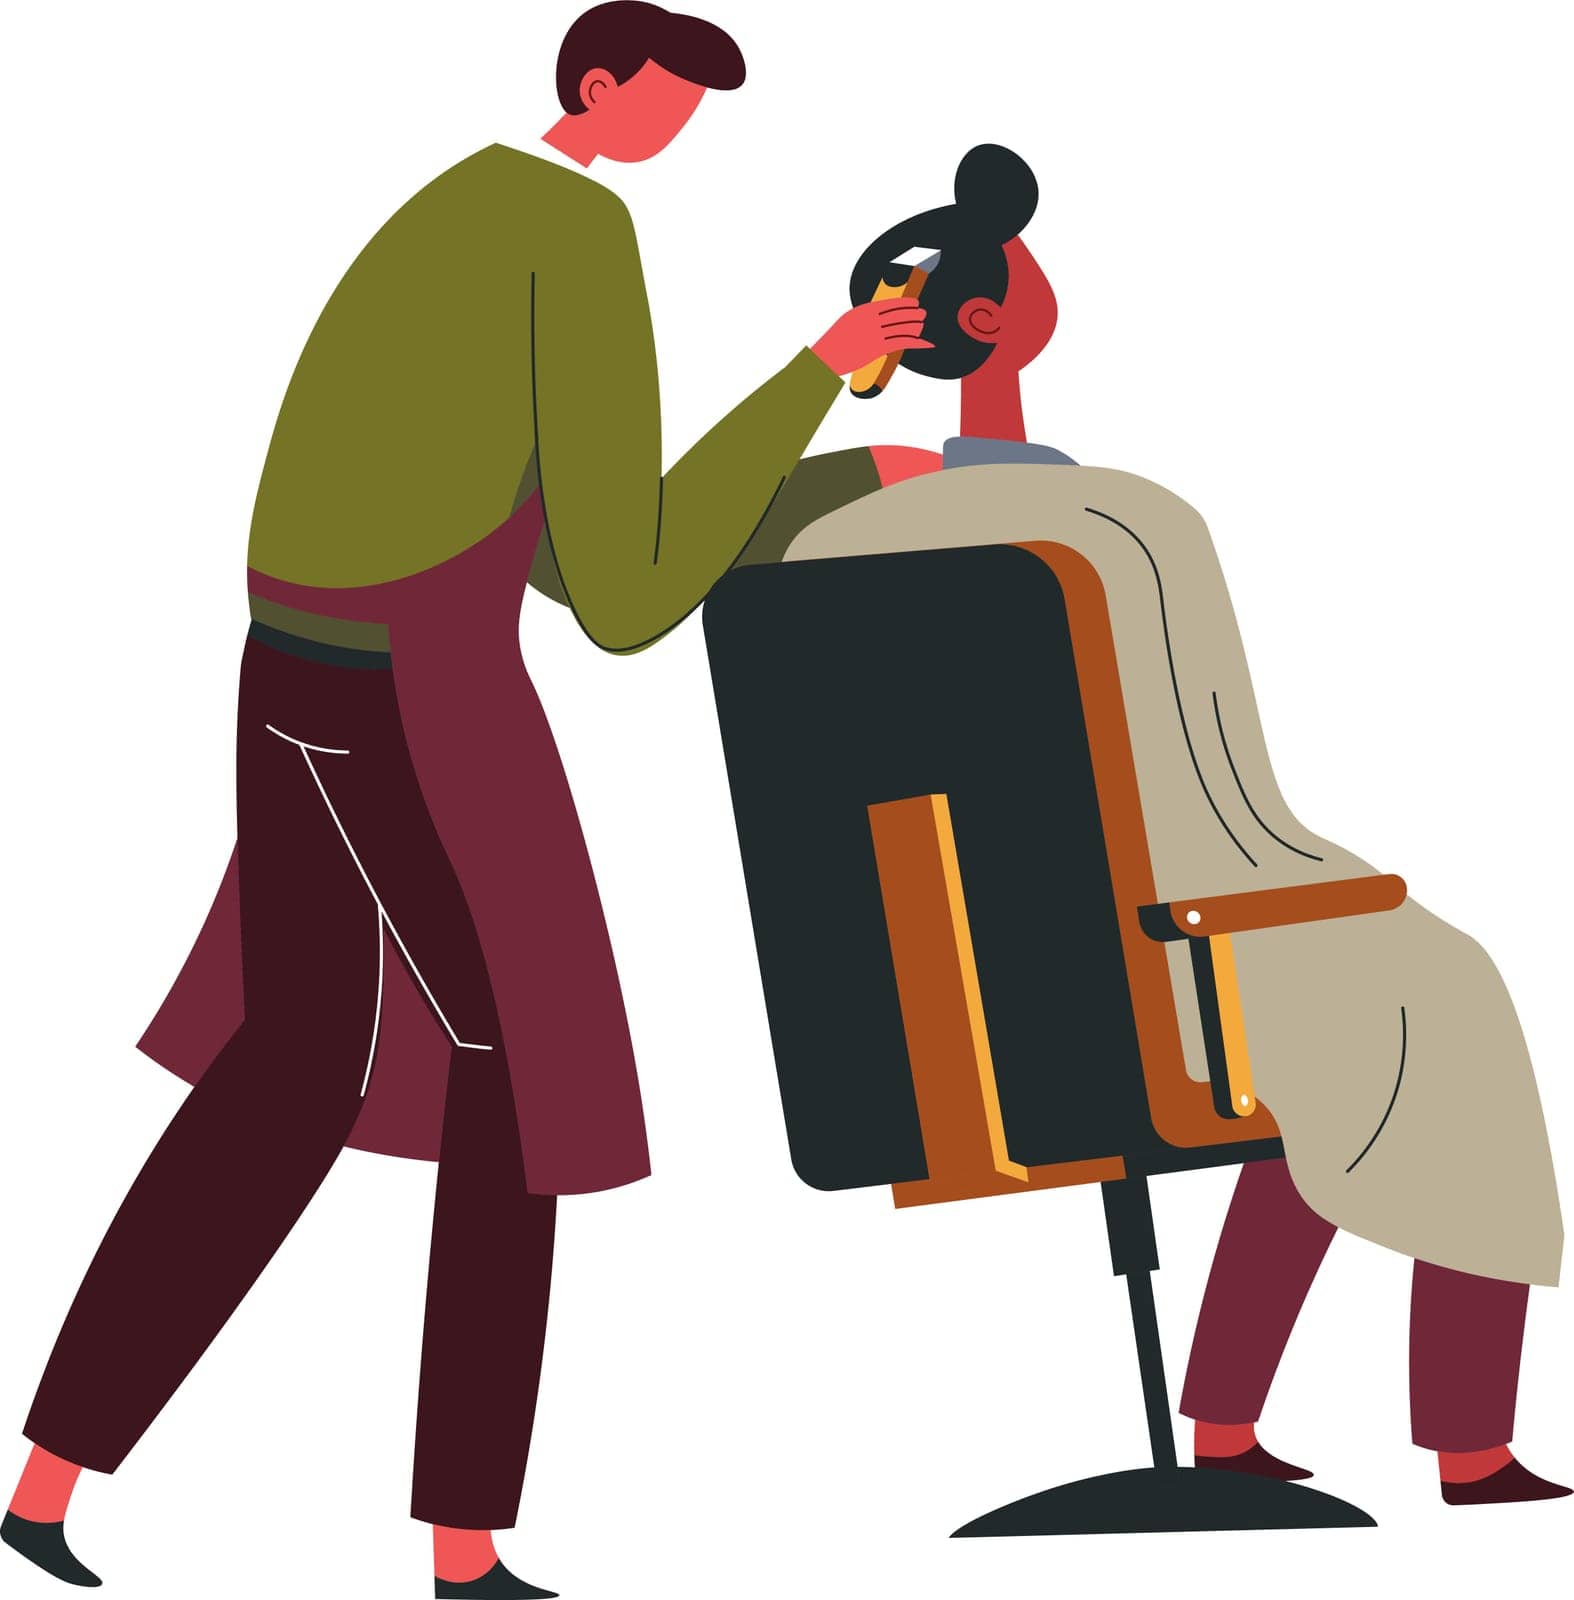 Professional barber cutting hair of client, barbershop service and care. Isolated man sitting in comfortable chair. Grooming and combing customer in a salon. Vector in flat style illustration